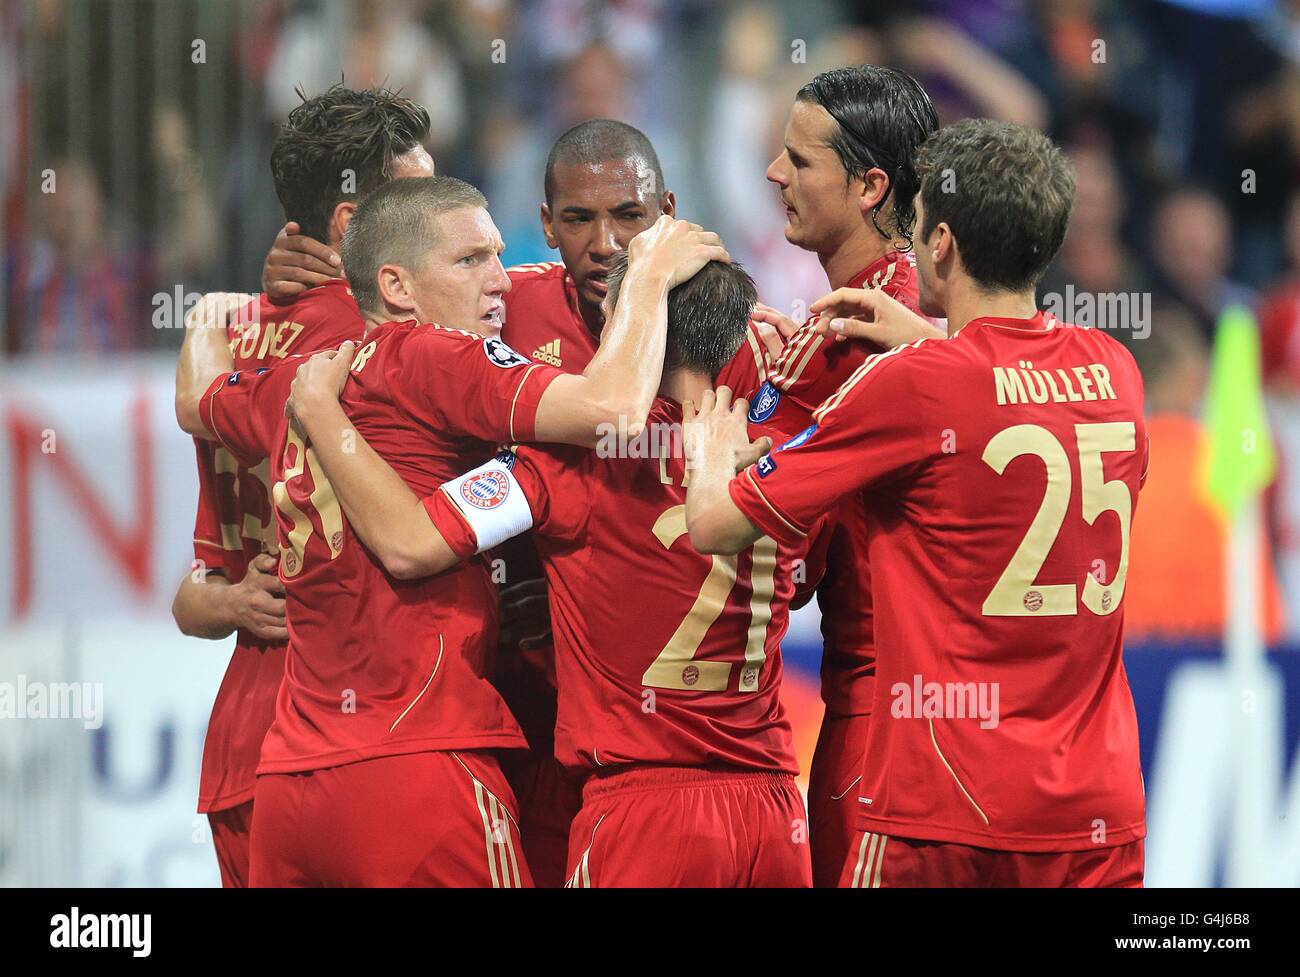 Bayern Munich's Mario Gomez (hidden left) is congratulated by his team mates after scoring Stock Photo